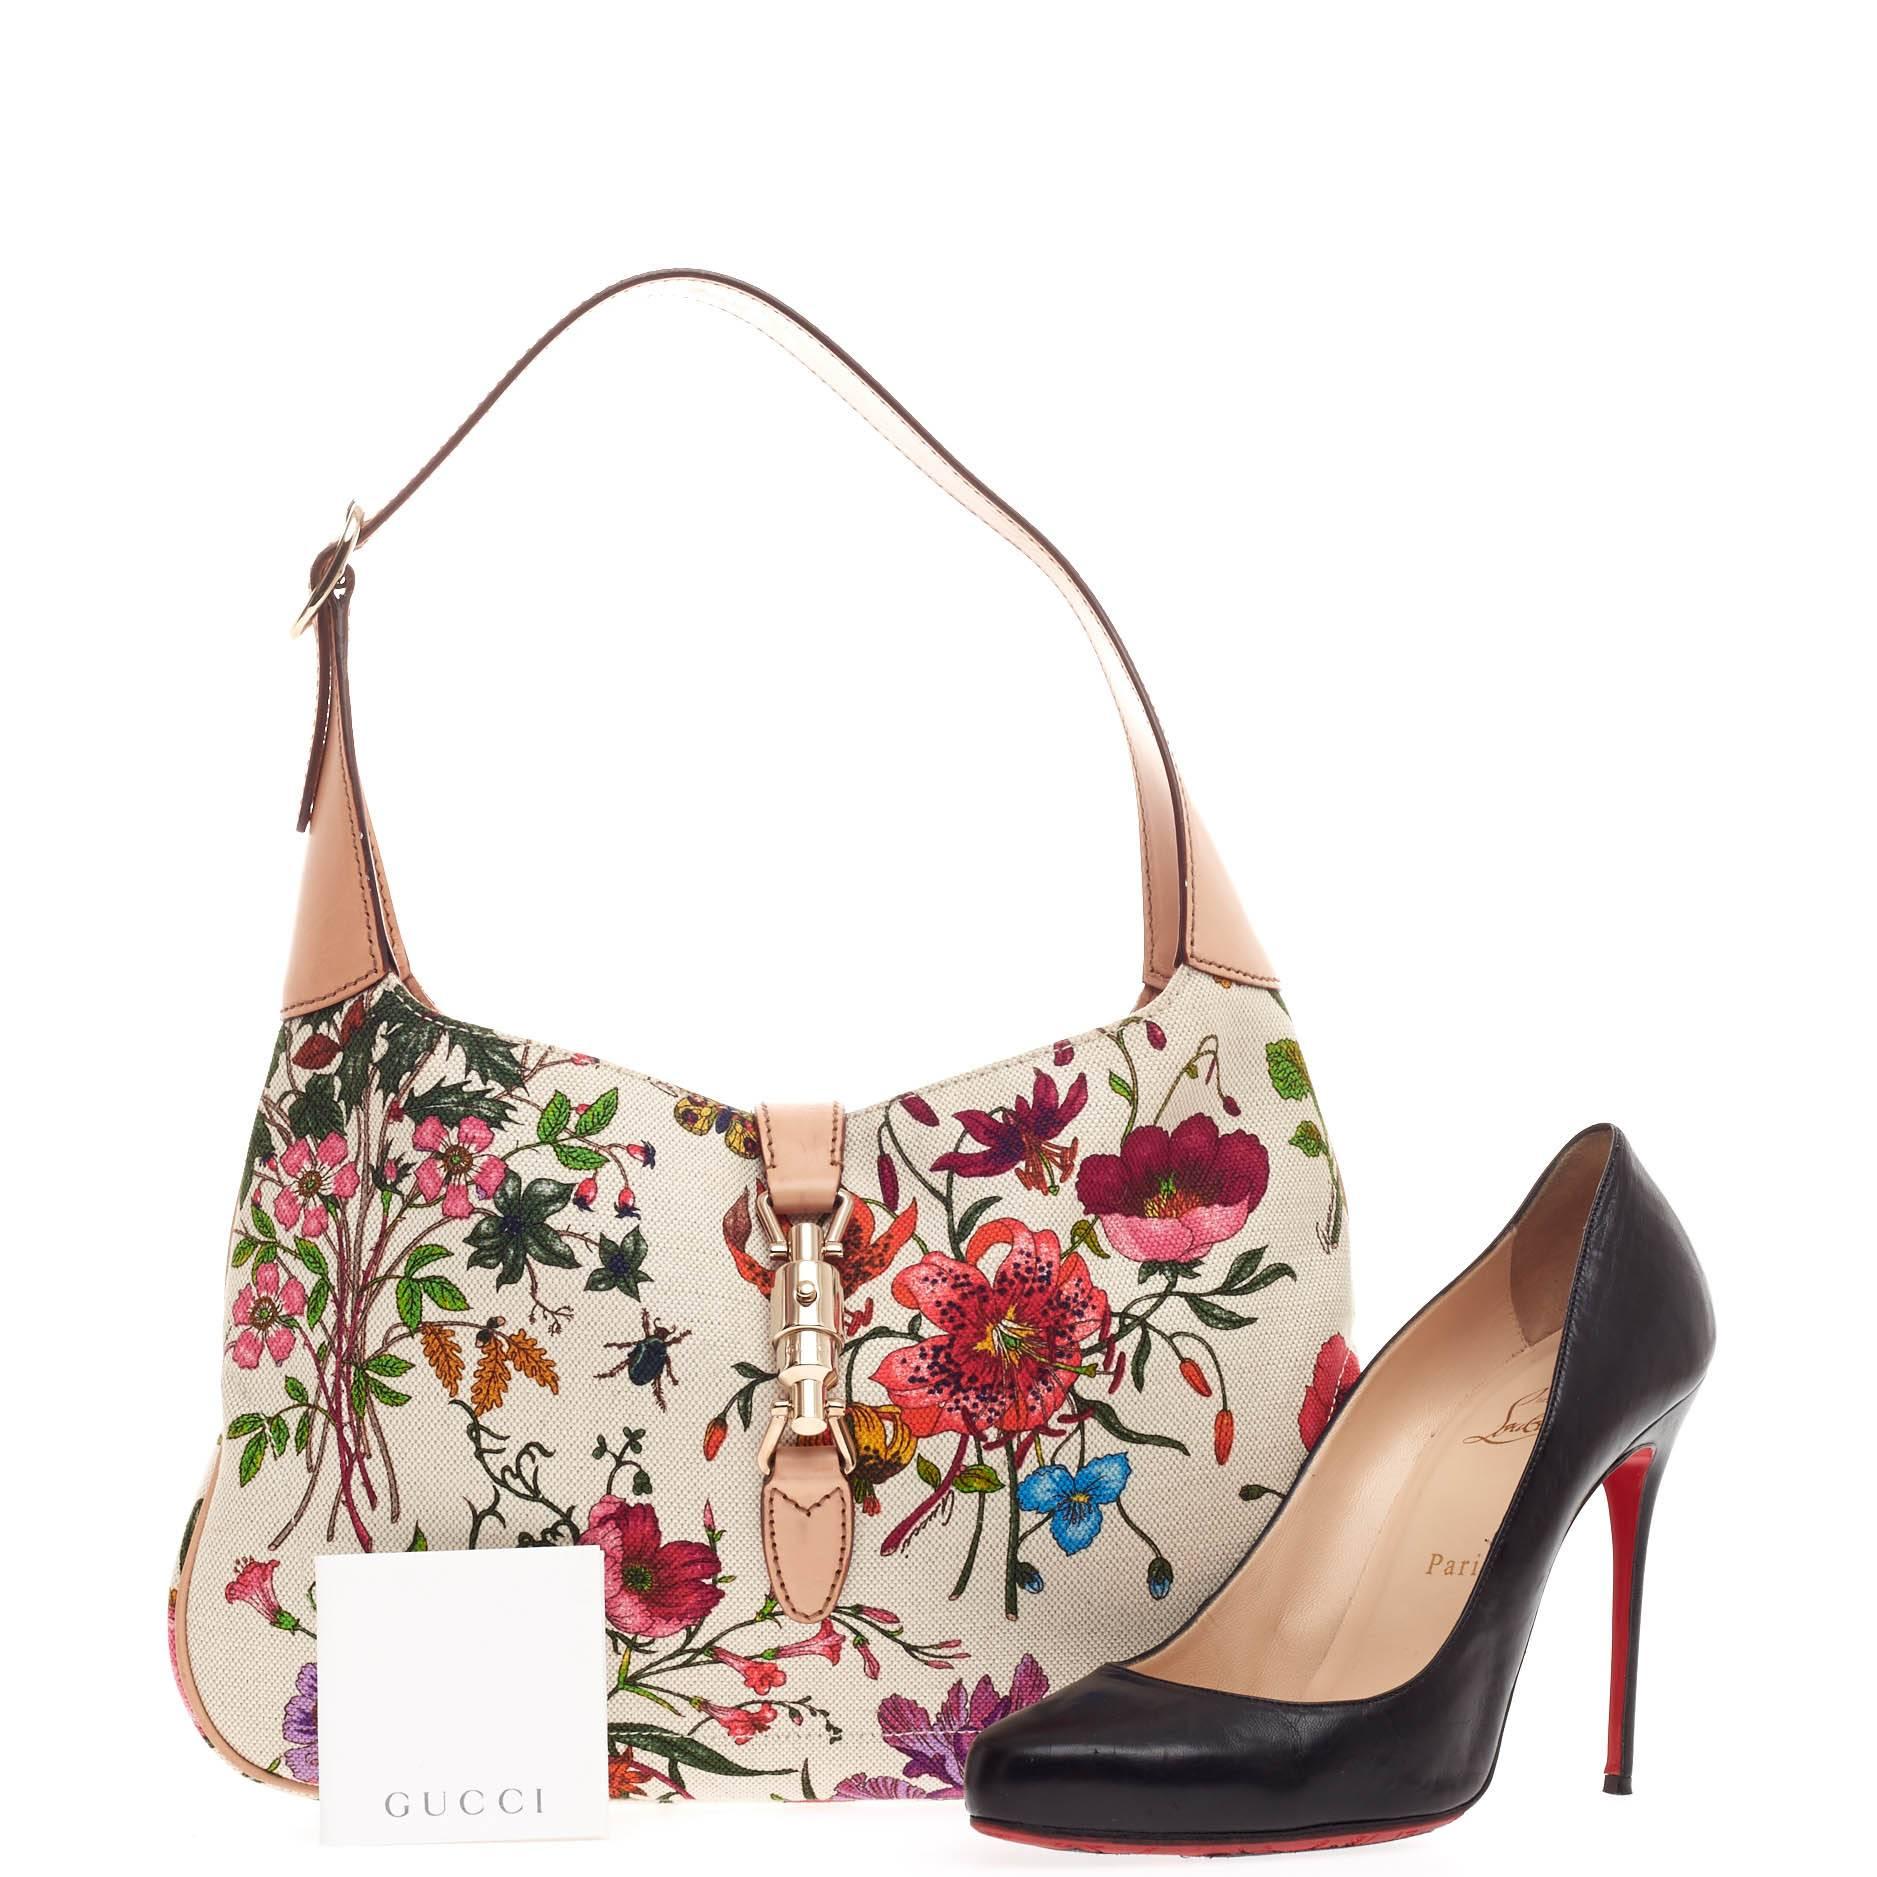 This authentic Gucci Jackie O Flora Canvas Small is a must-have everyday shoulder bag fit for the modern woman. Constructed from a beautiful multicolor floral canvas print with vachetta leather trims, this iconic bag features an adjustable shoulder